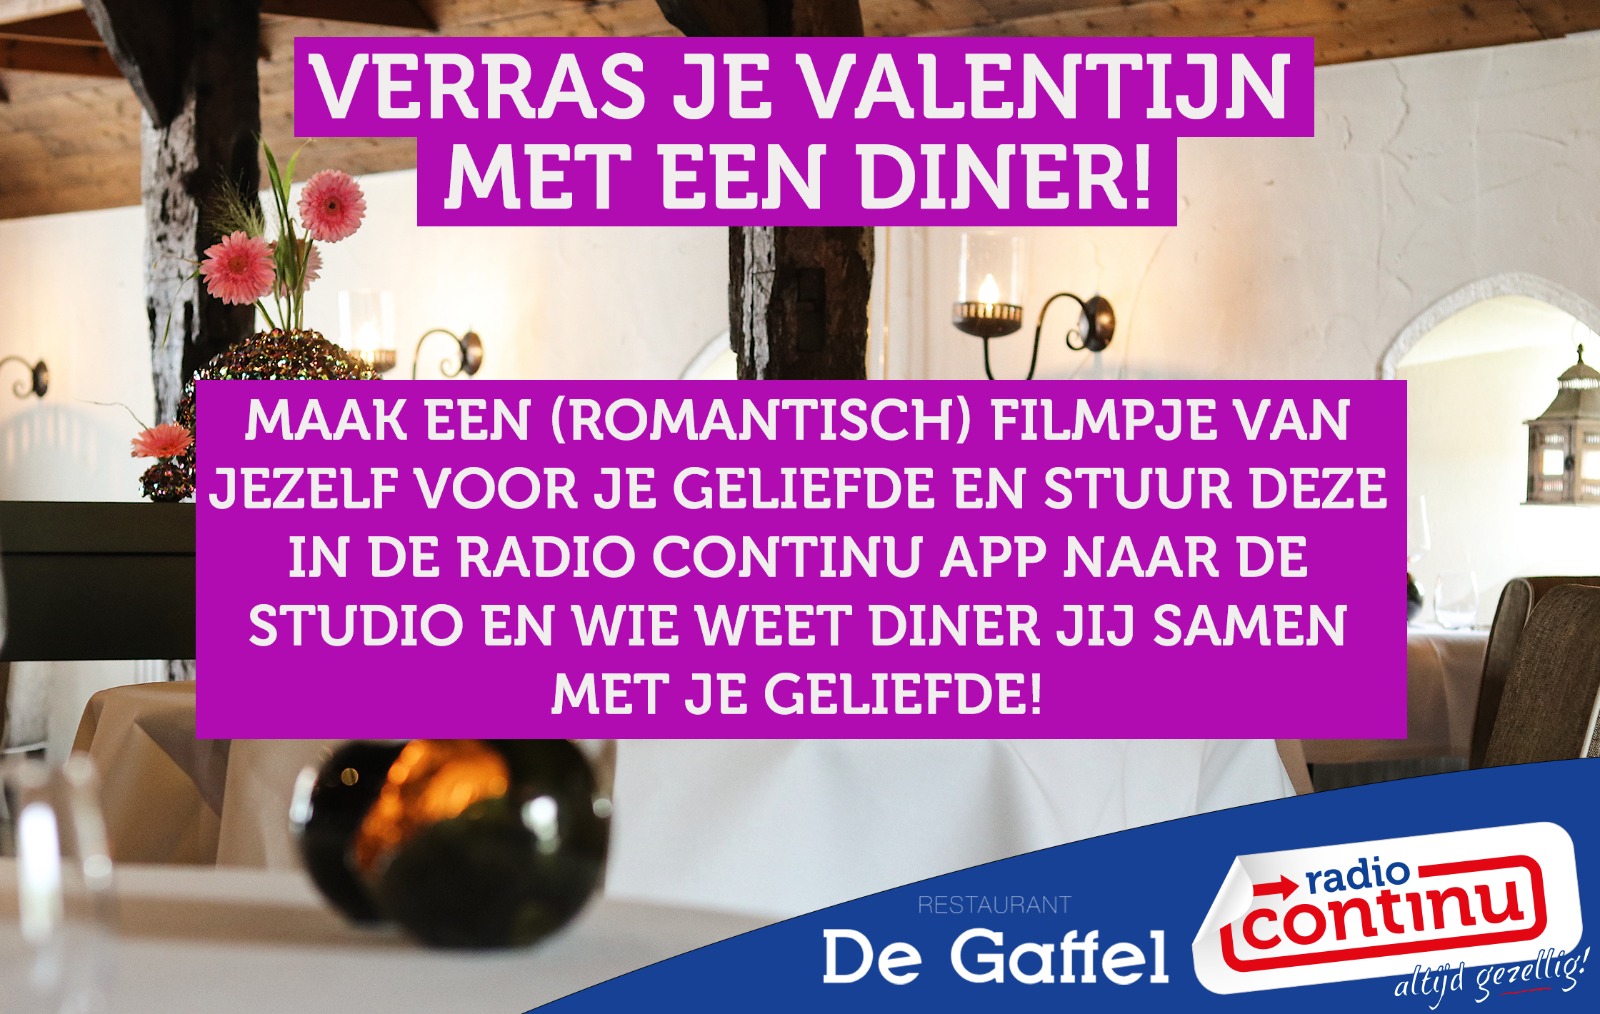 Love is in the air! Win deze week